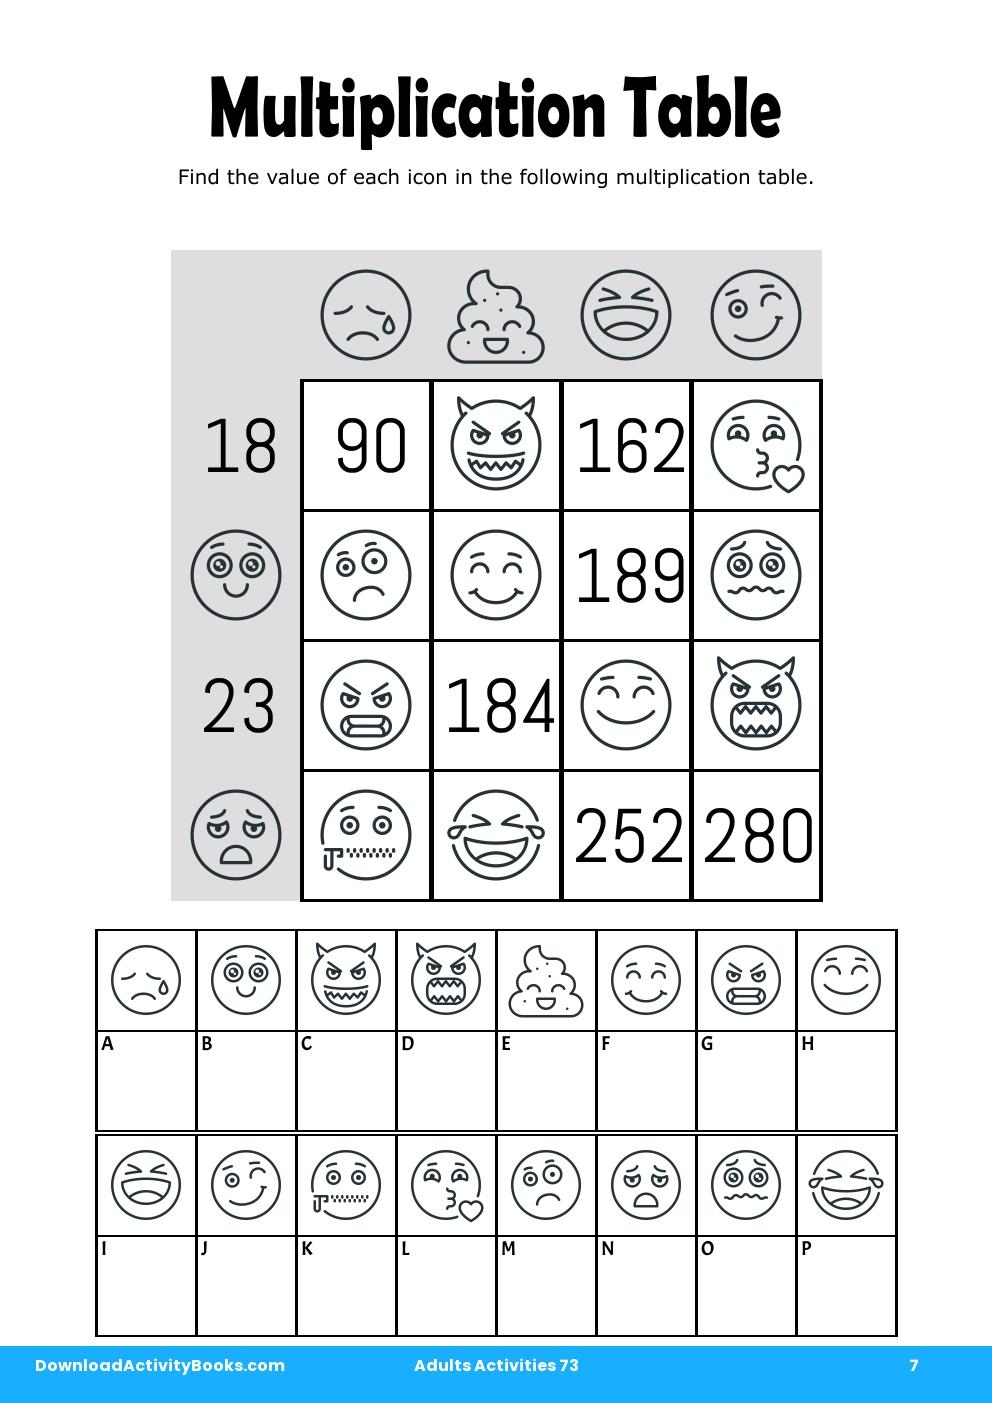 Multiplication Table in Adults Activities 73